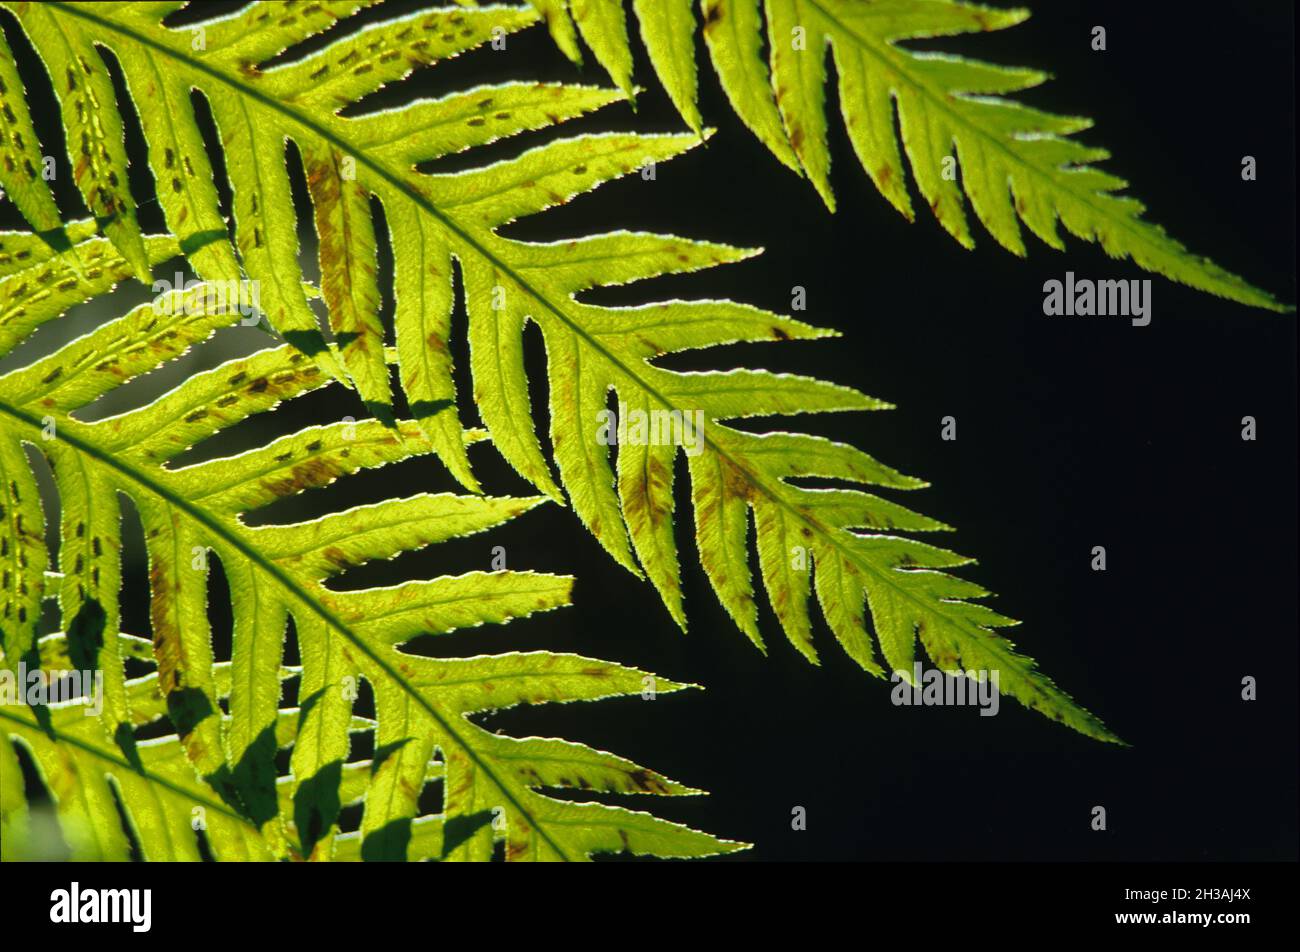 FRANCE. OVERVIEW ON A FERN Stock Photo